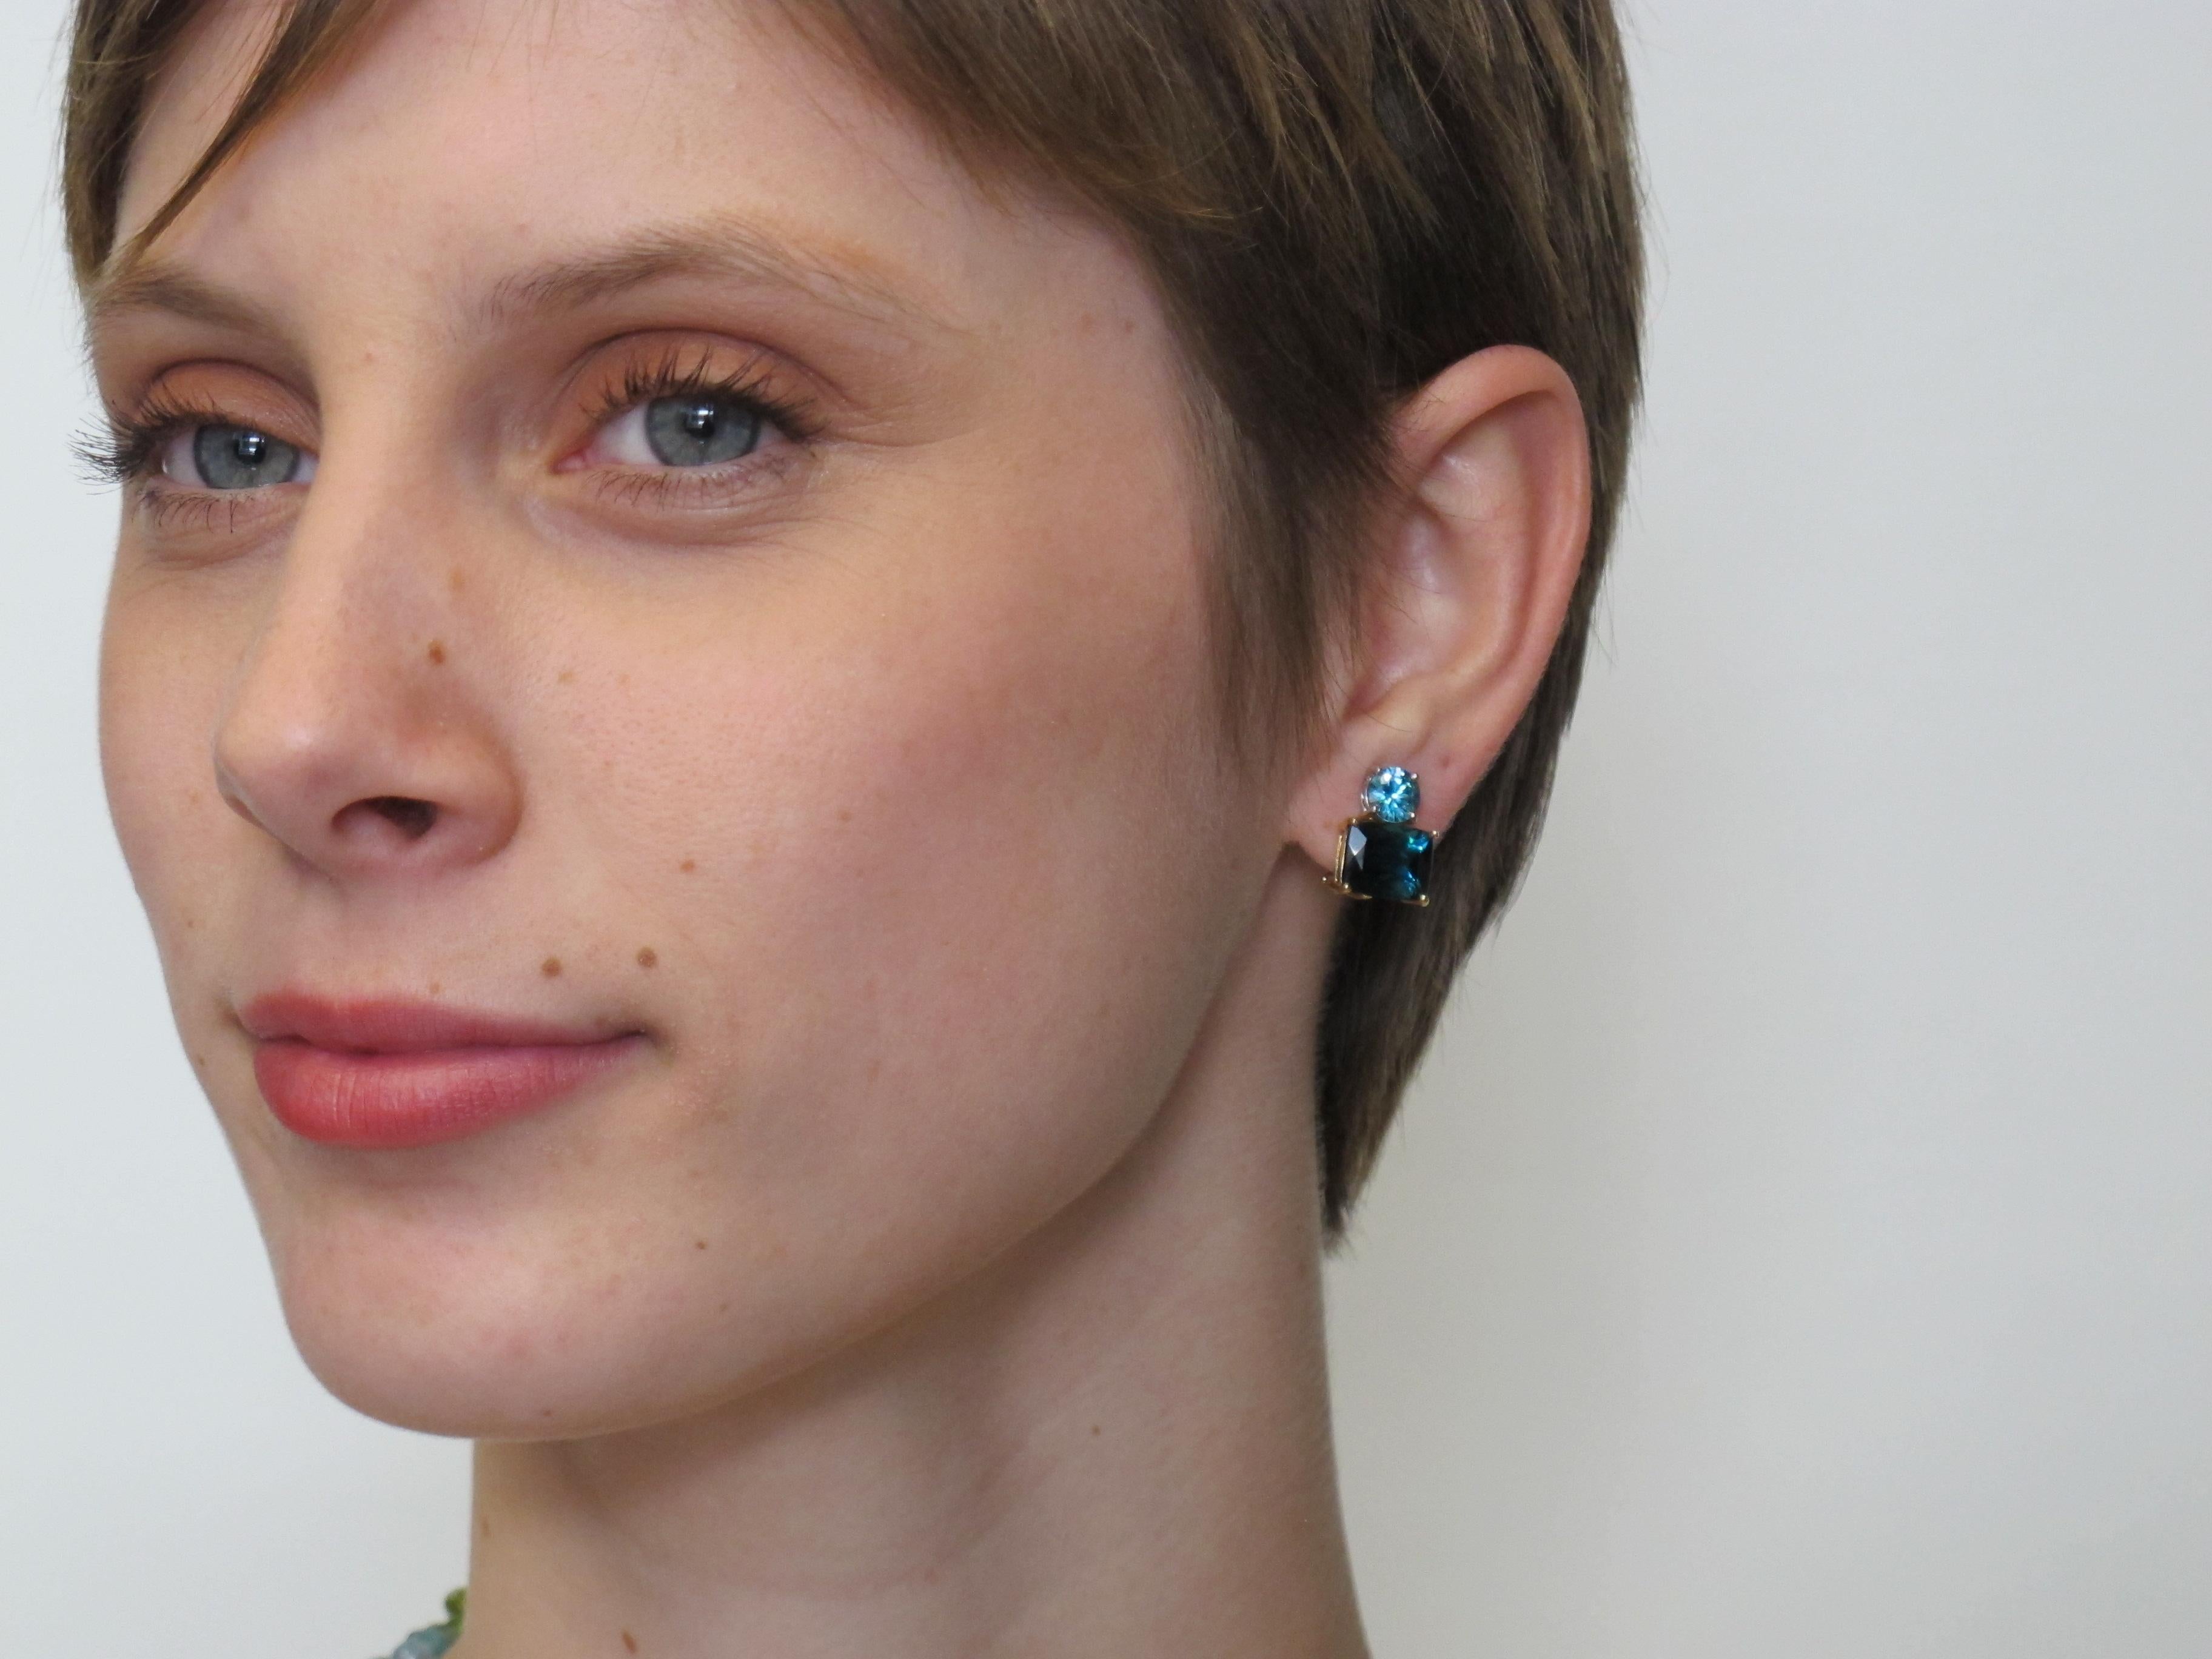 True indicolite blue tourmalines are very rare, especially in the exceptionally fine quality we used to make these earrings. Ours are beautifully matched,  deep greenish-blue and beautifully facetted in cushion cuts. The pair of  indicolites weigh a